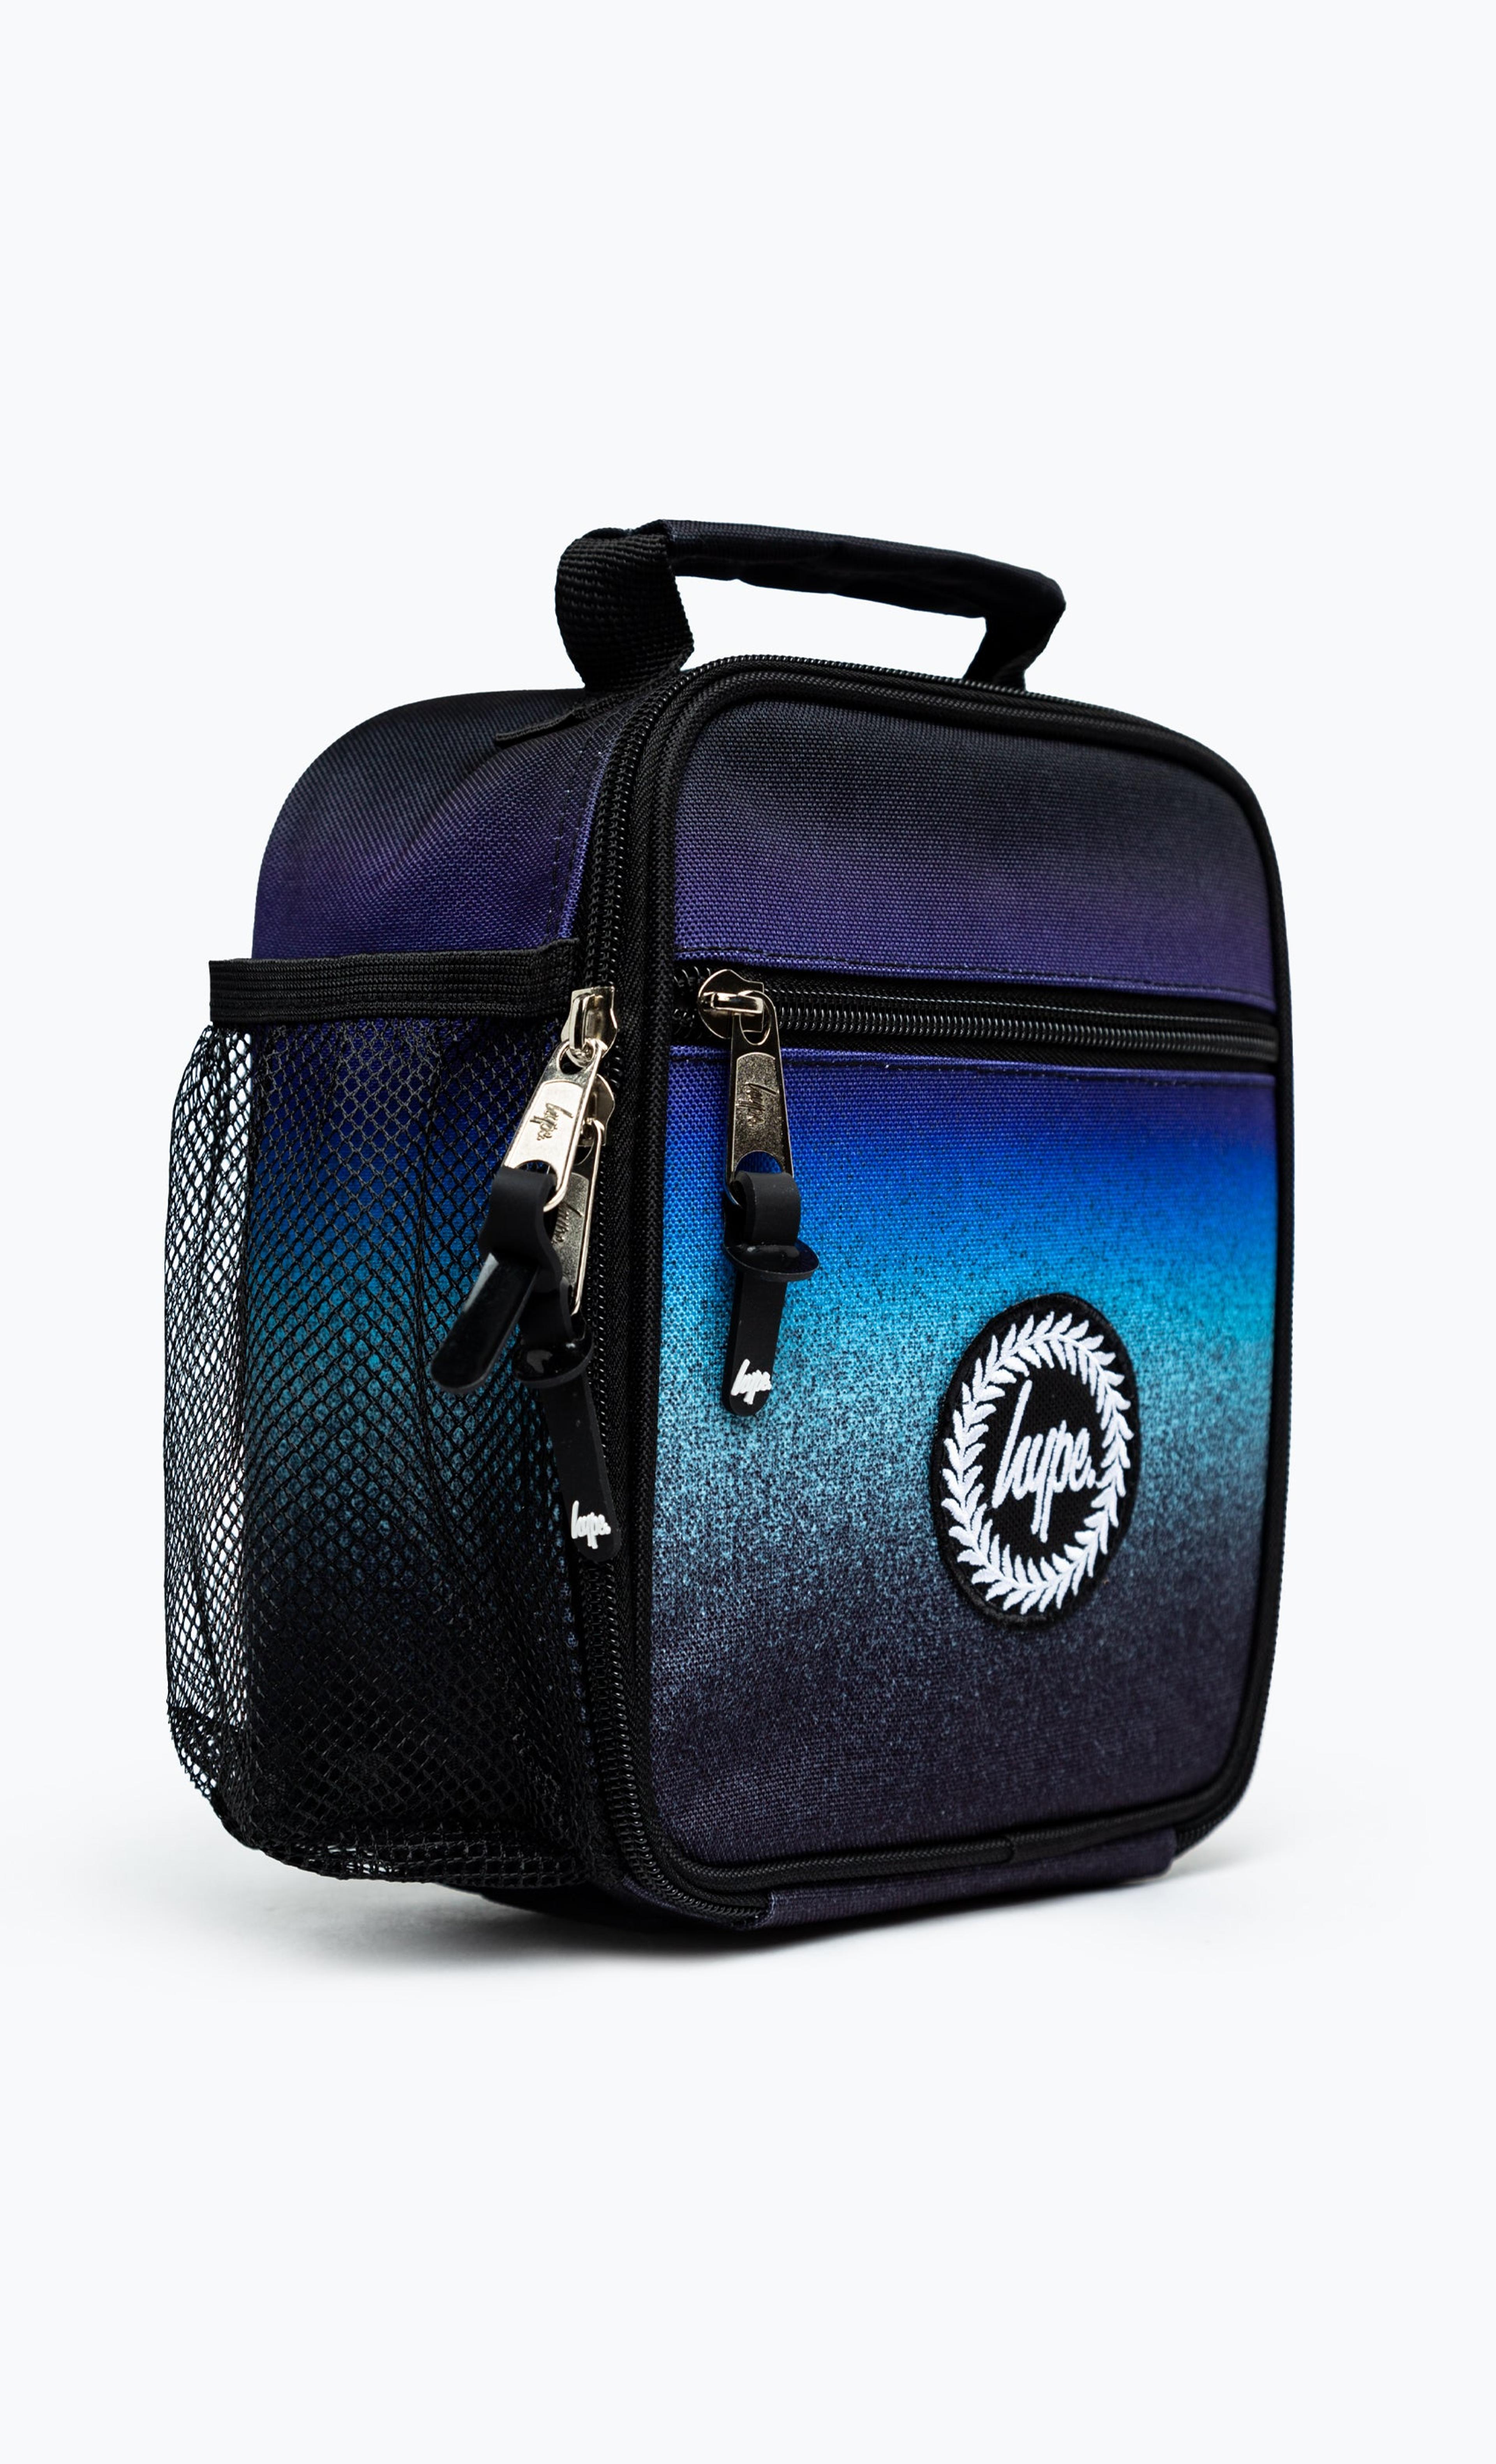 Alternate View 1 of HYPE UNISEX BLUE SPECKLE FADE CREST LUNCHBOX